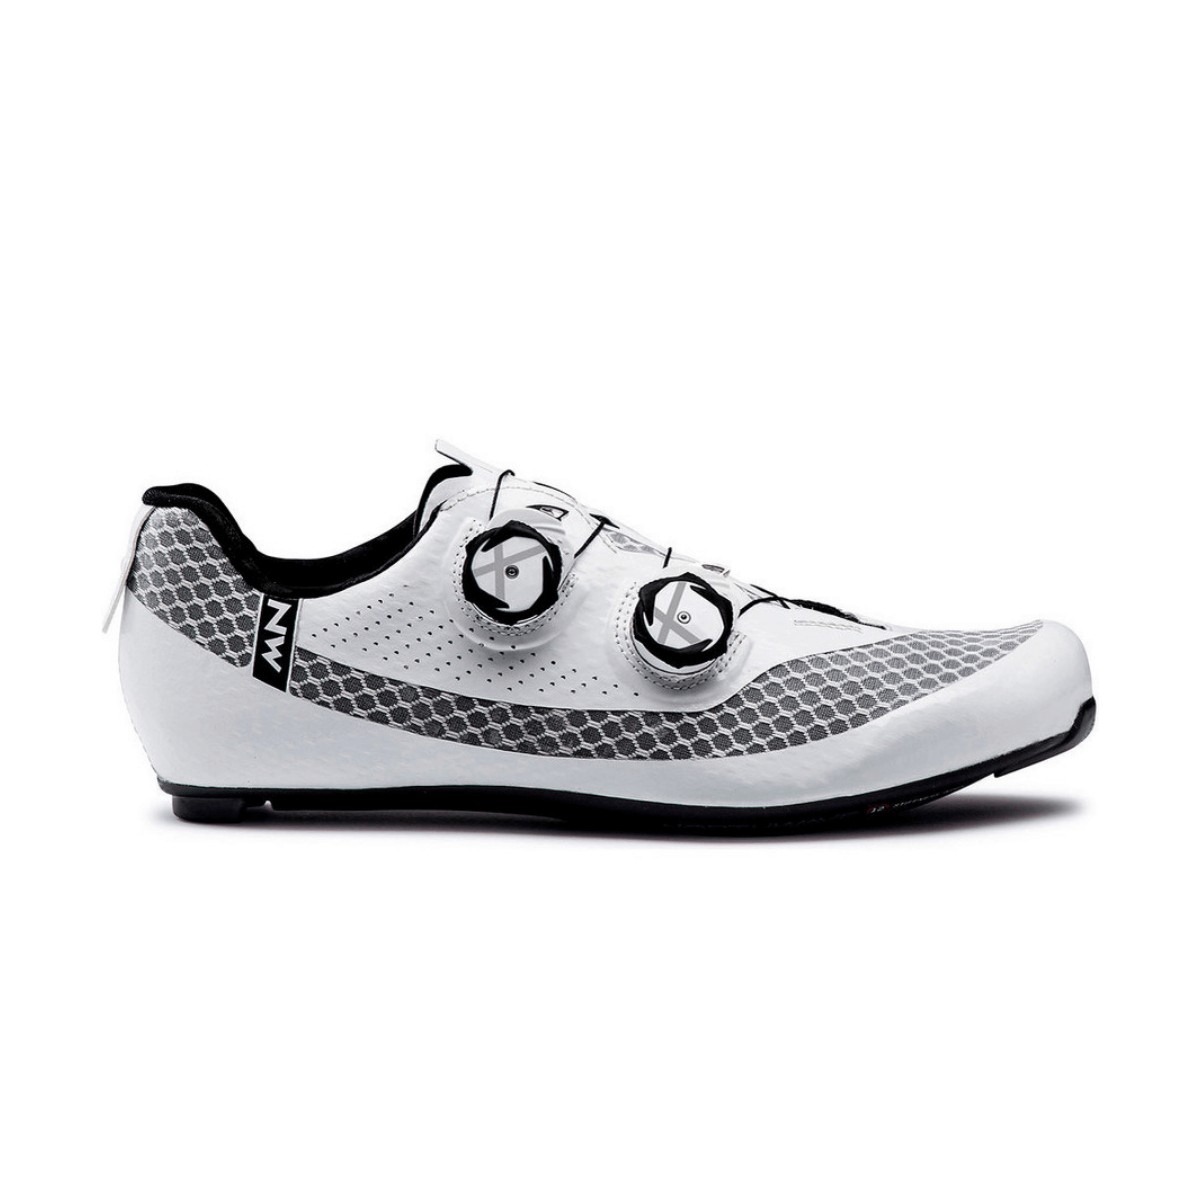 Chaussures Northwave Mistral Plus Blanc, Taille 41 - EUR